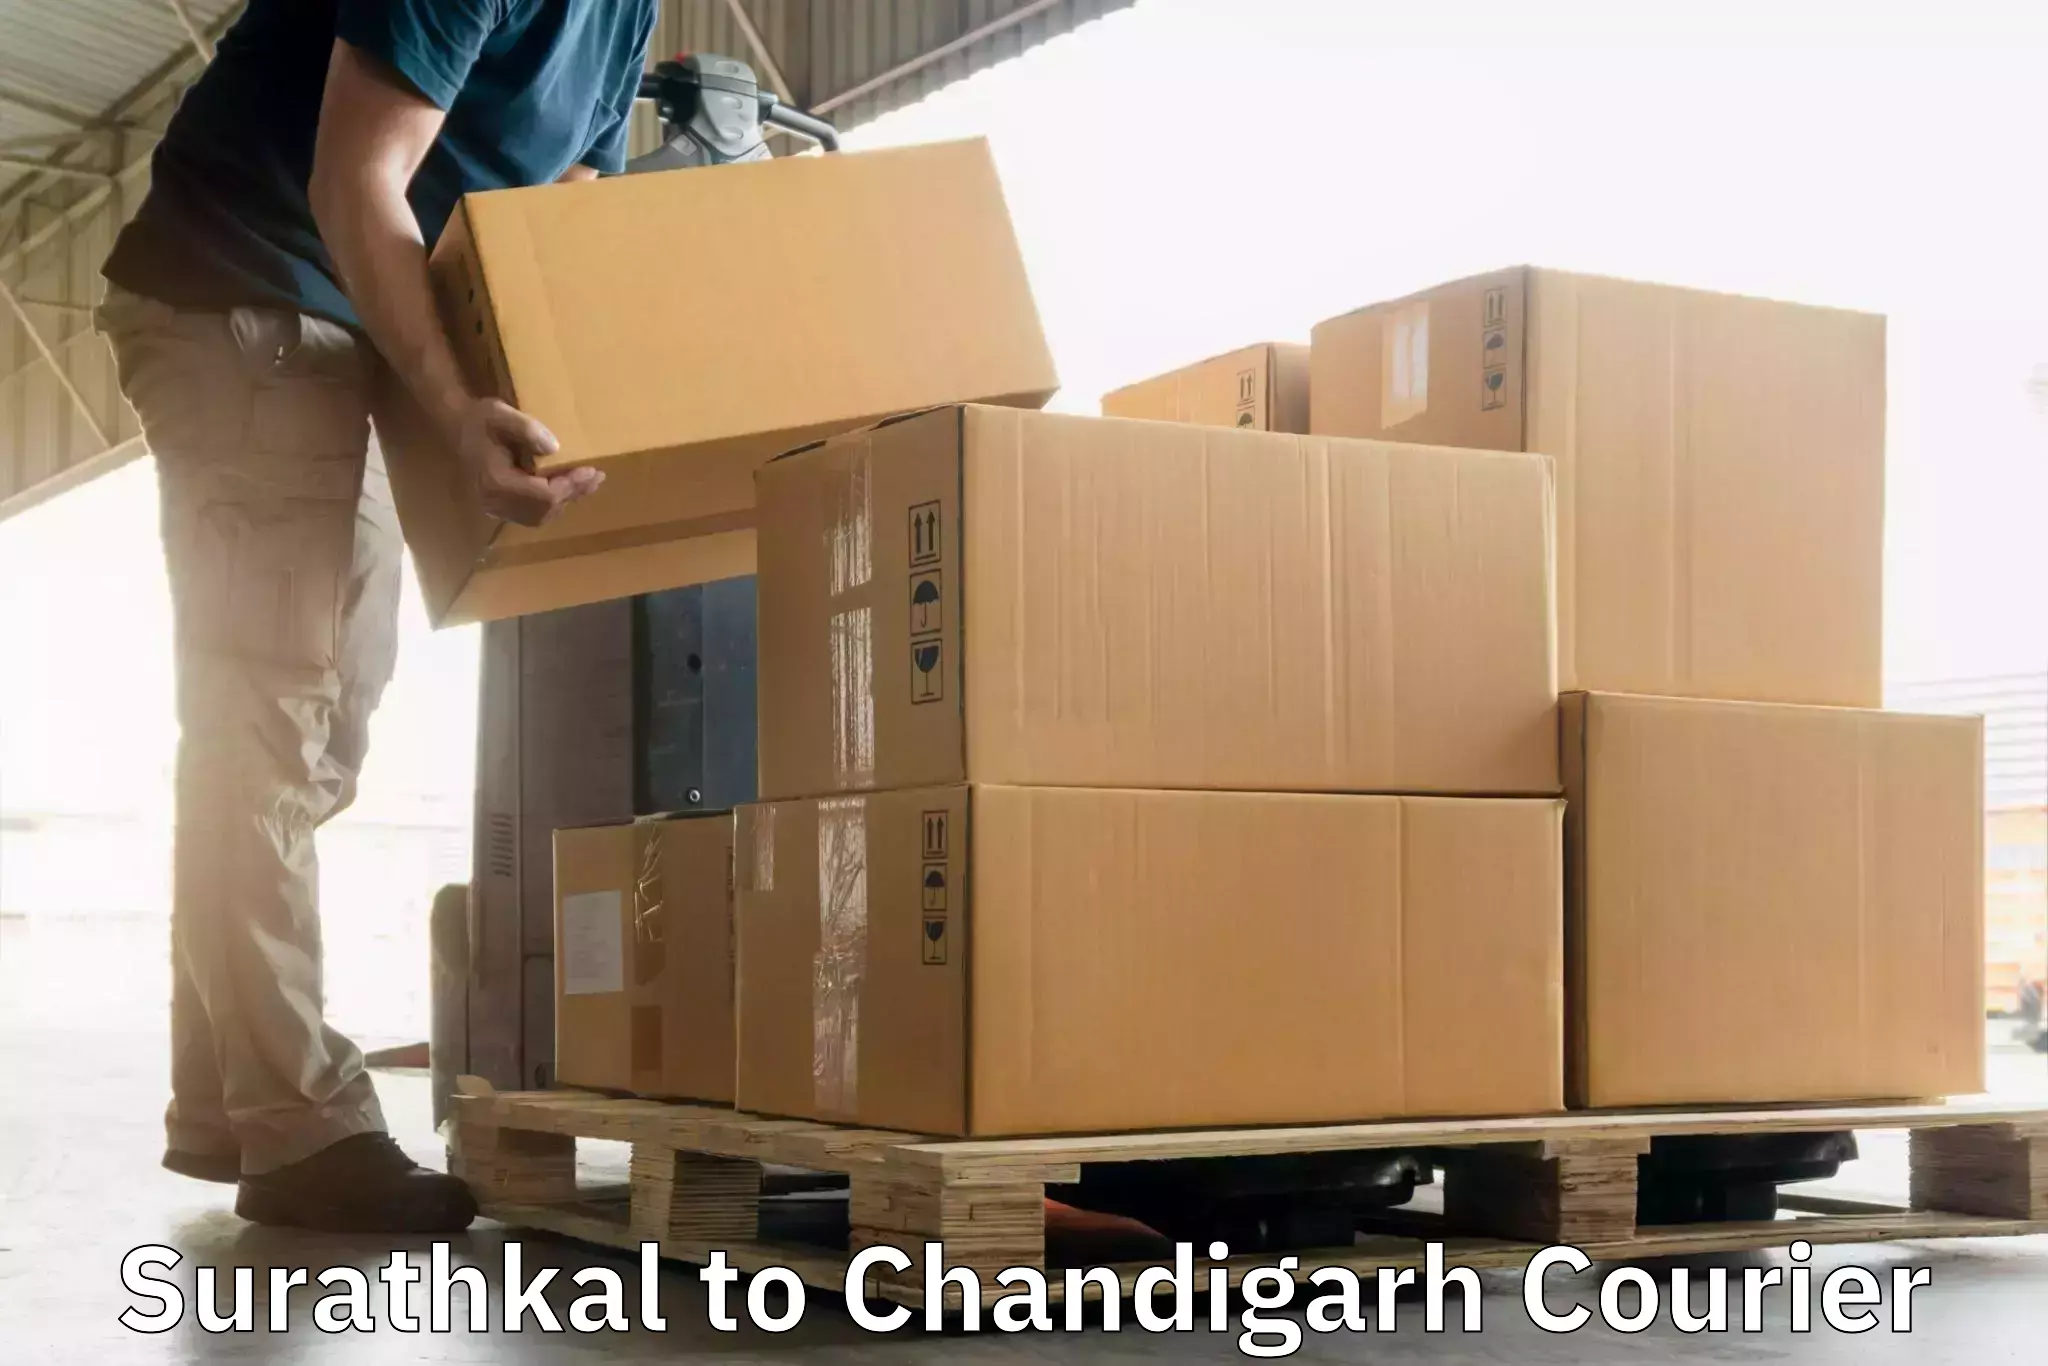 State-of-the-art courier technology Surathkal to Chandigarh